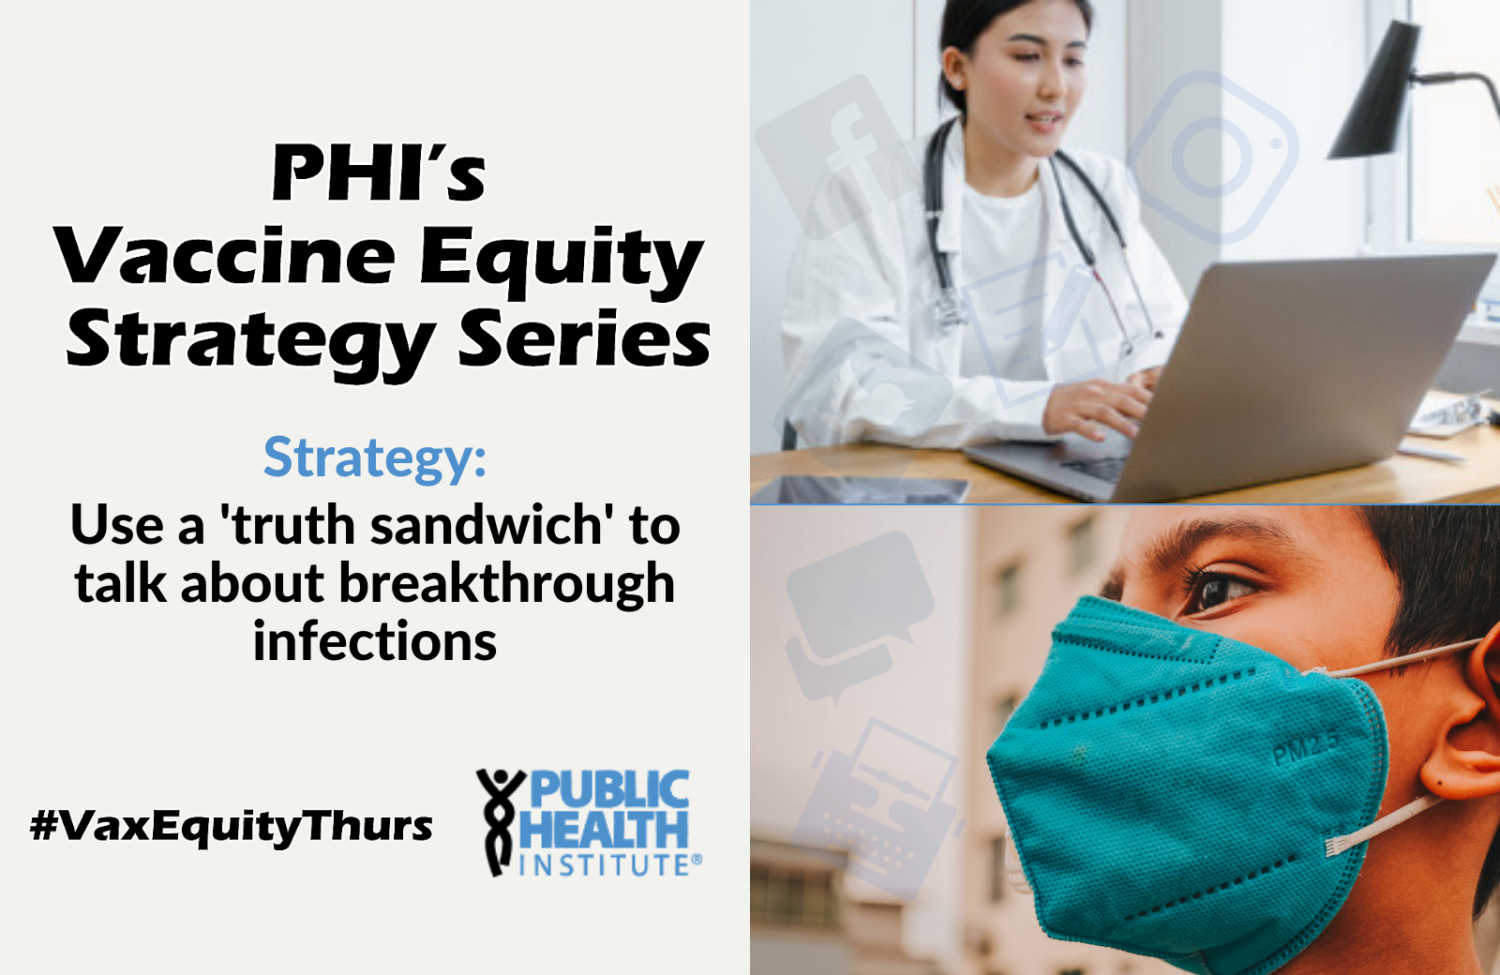 Strategy: Use a 'truth sandwich' to talk about breakthrough infections